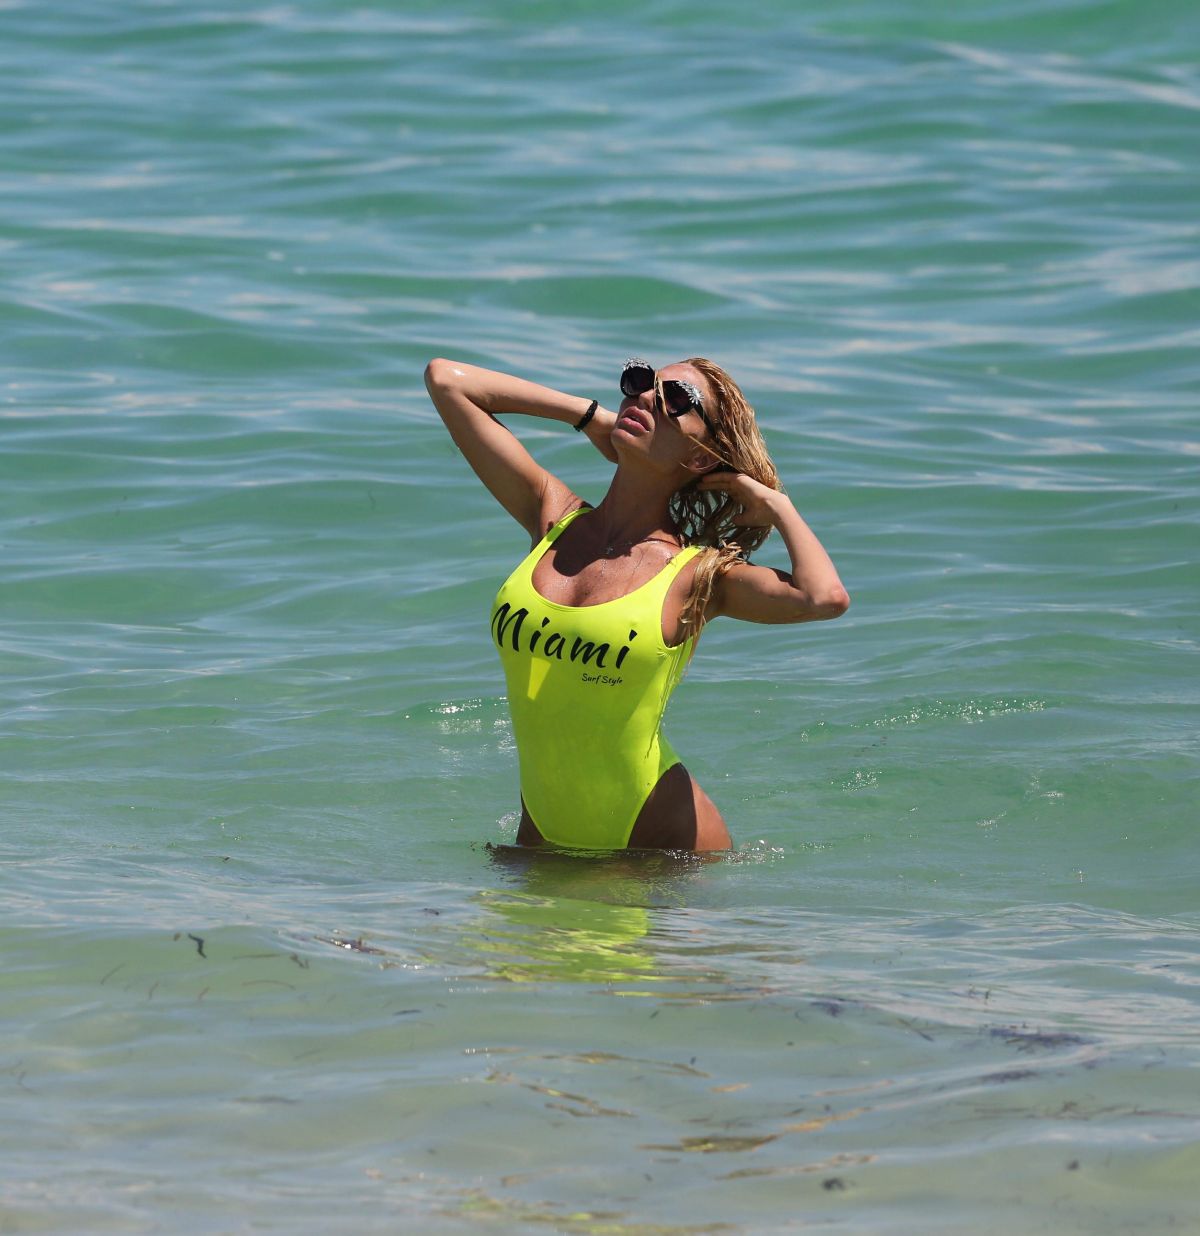 vicky-zipolitakis-in-yellow-swimsuit-at-a-beach-in-miami-09-21-2016_10.jpg